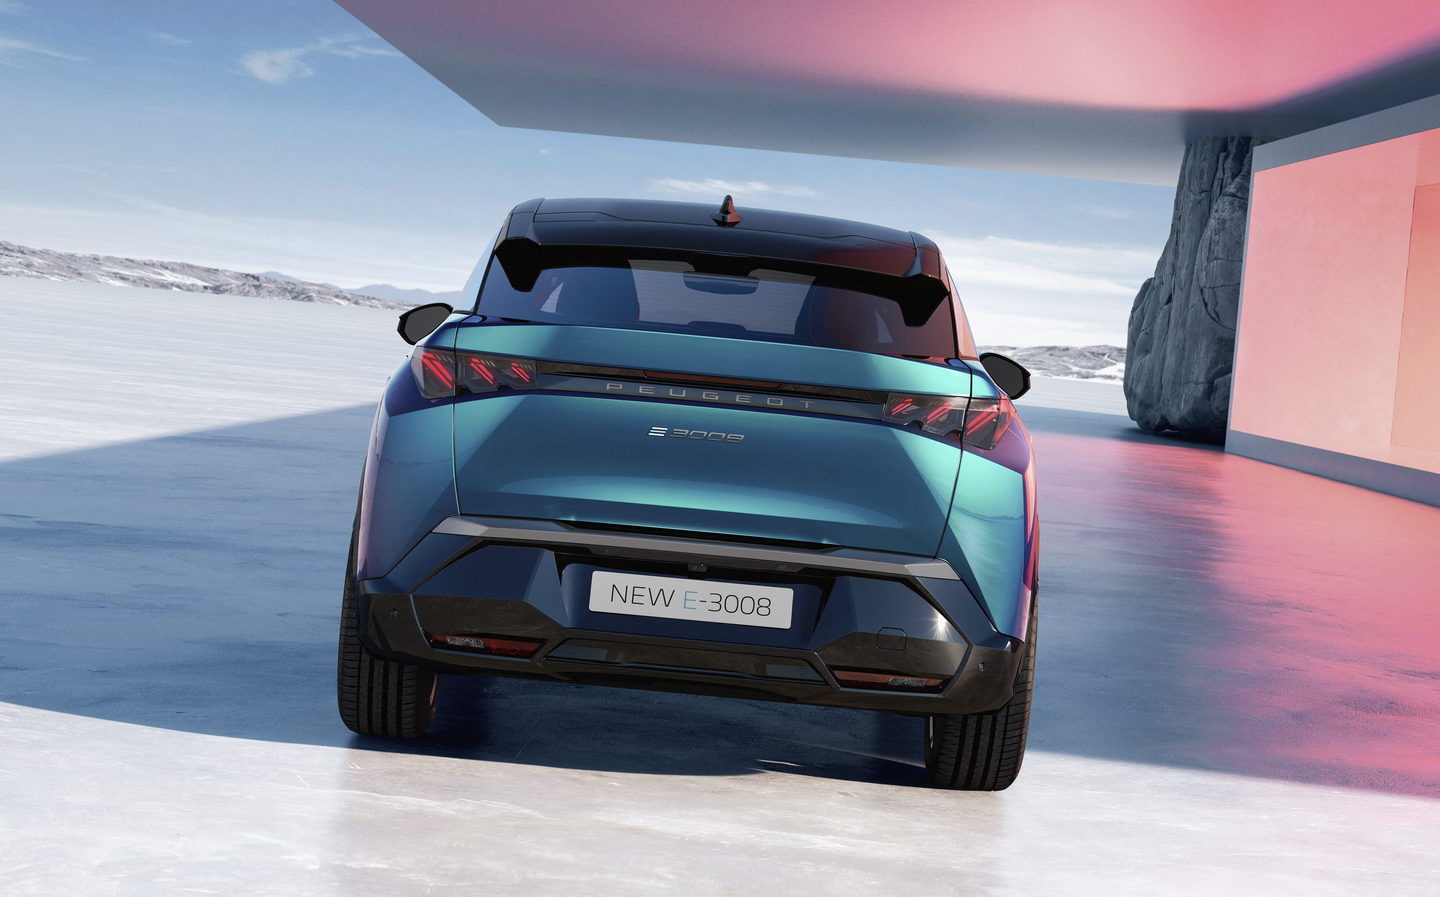 3008, crossover, e-3008, electric, peugeot, new electric peugeot 3008 crossover gets 435-mile range and dramatic styling